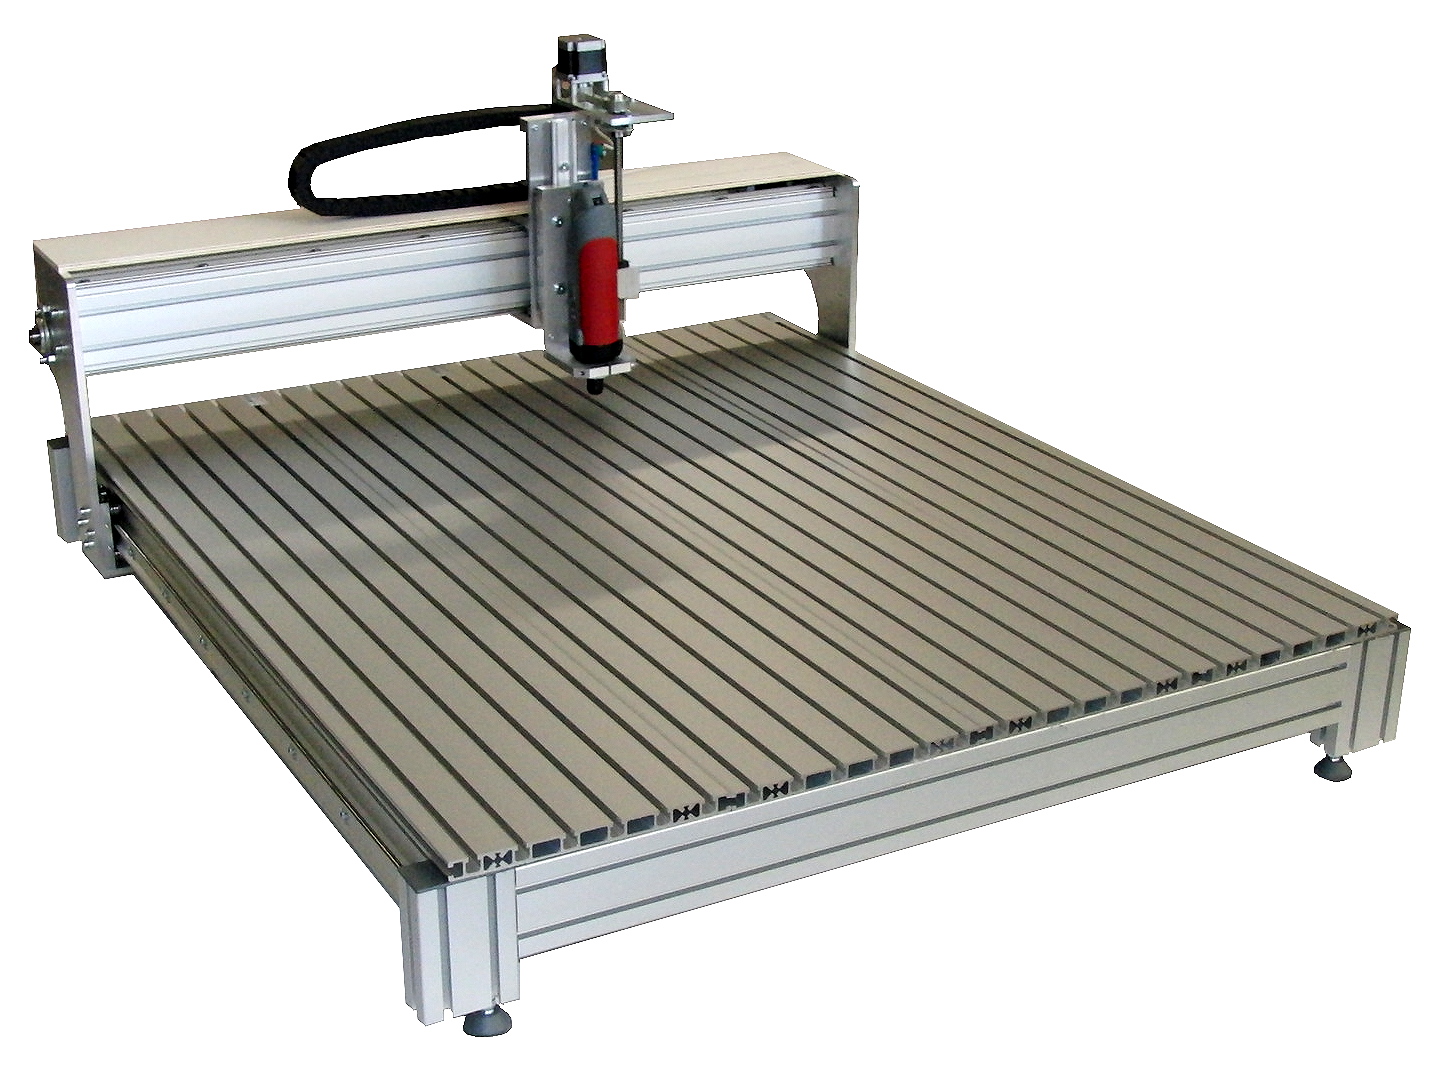 T-Grooved Table Pro Vario 14-10 1800mm x 1080mm